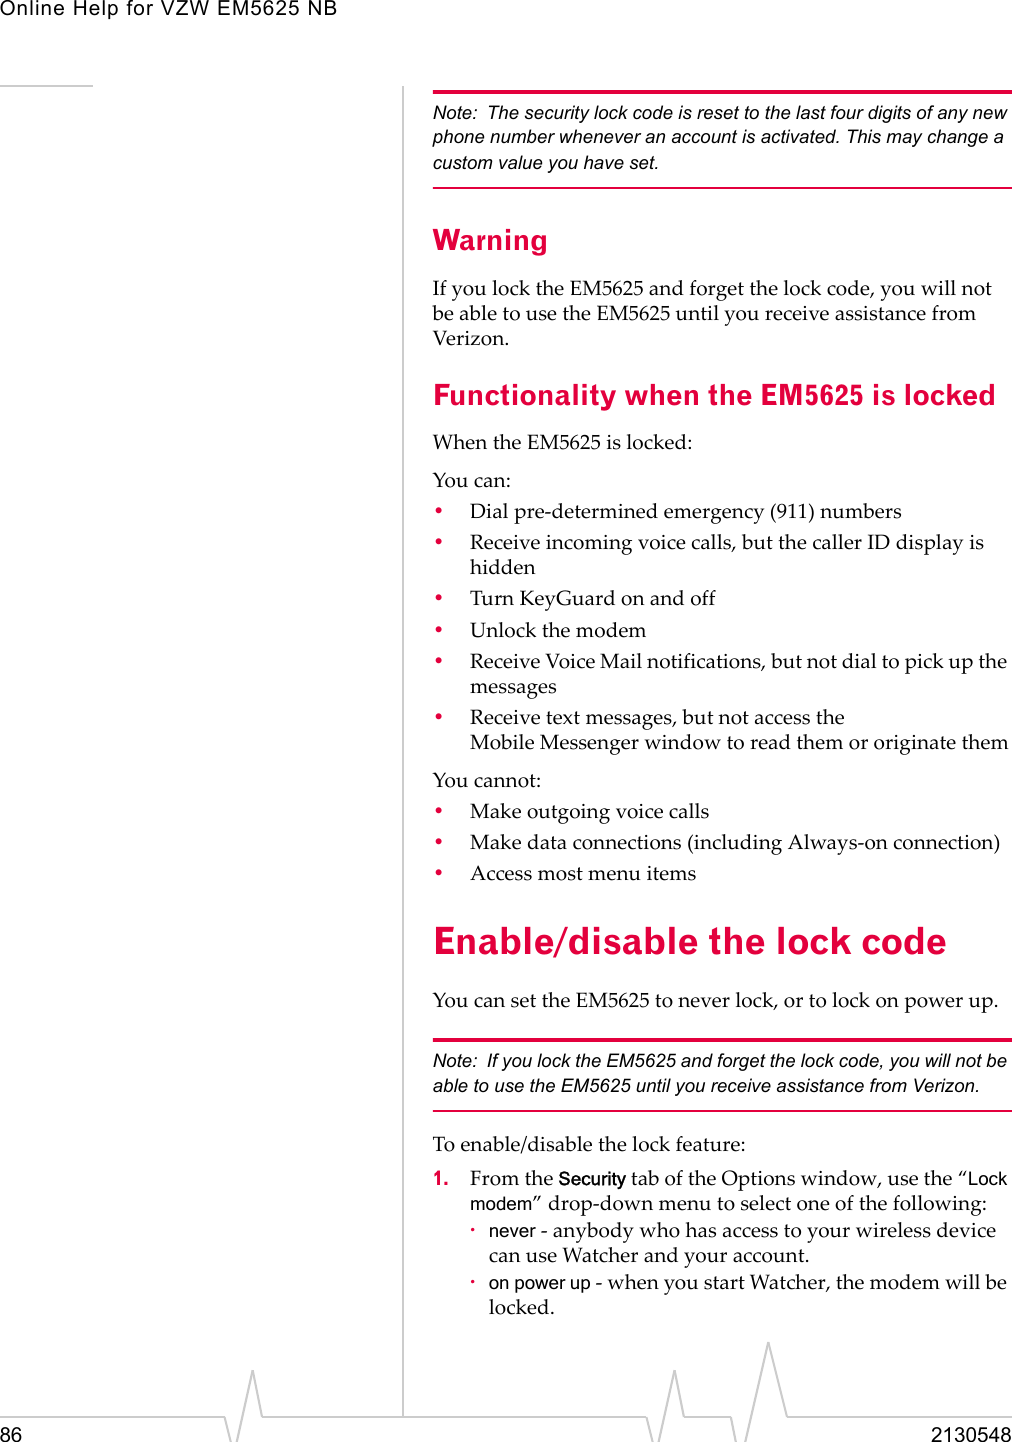 Online Help for VZW EM5625 NB86 2130548Note: The security lock code is reset to the last four digits of any new phone number whenever an account is activated. This may change a custom value you have set.WarningIf you lock the EM5625 and forget the lock code, you will not be able to use the EM5625 until you receive assistance from Verizon.Functionality when the EM5625 is lockedWhen the EM5625 is locked:You can:•Dial pre-determined emergency (911) numbers•Receive incoming voice calls, but the caller ID display is hidden•Turn KeyGuard on and off•Unlock the modem•Receive Voice Mail notifications, but not dial to pick up the messages•Receive text messages, but not access the Mobile Messenger window to read them or originate themYou cannot:•Make outgoing voice calls•Make data connections (including Always-on connection)•Access most menu itemsEnable/disable the lock codeYou can set the EM5625 to never lock, or to lock on power up.Note: If you lock the EM5625 and forget the lock code, you will not be able to use the EM5625 until you receive assistance from Verizon.To enable/disable the lock feature:1. From the Security tab of the Options window, use the “Lock modem” drop-down menu to select one of the following:·never - anybody who has access to your wireless device can use Watcher and your account.·on power up - when you start Watcher, the modem will be locked.